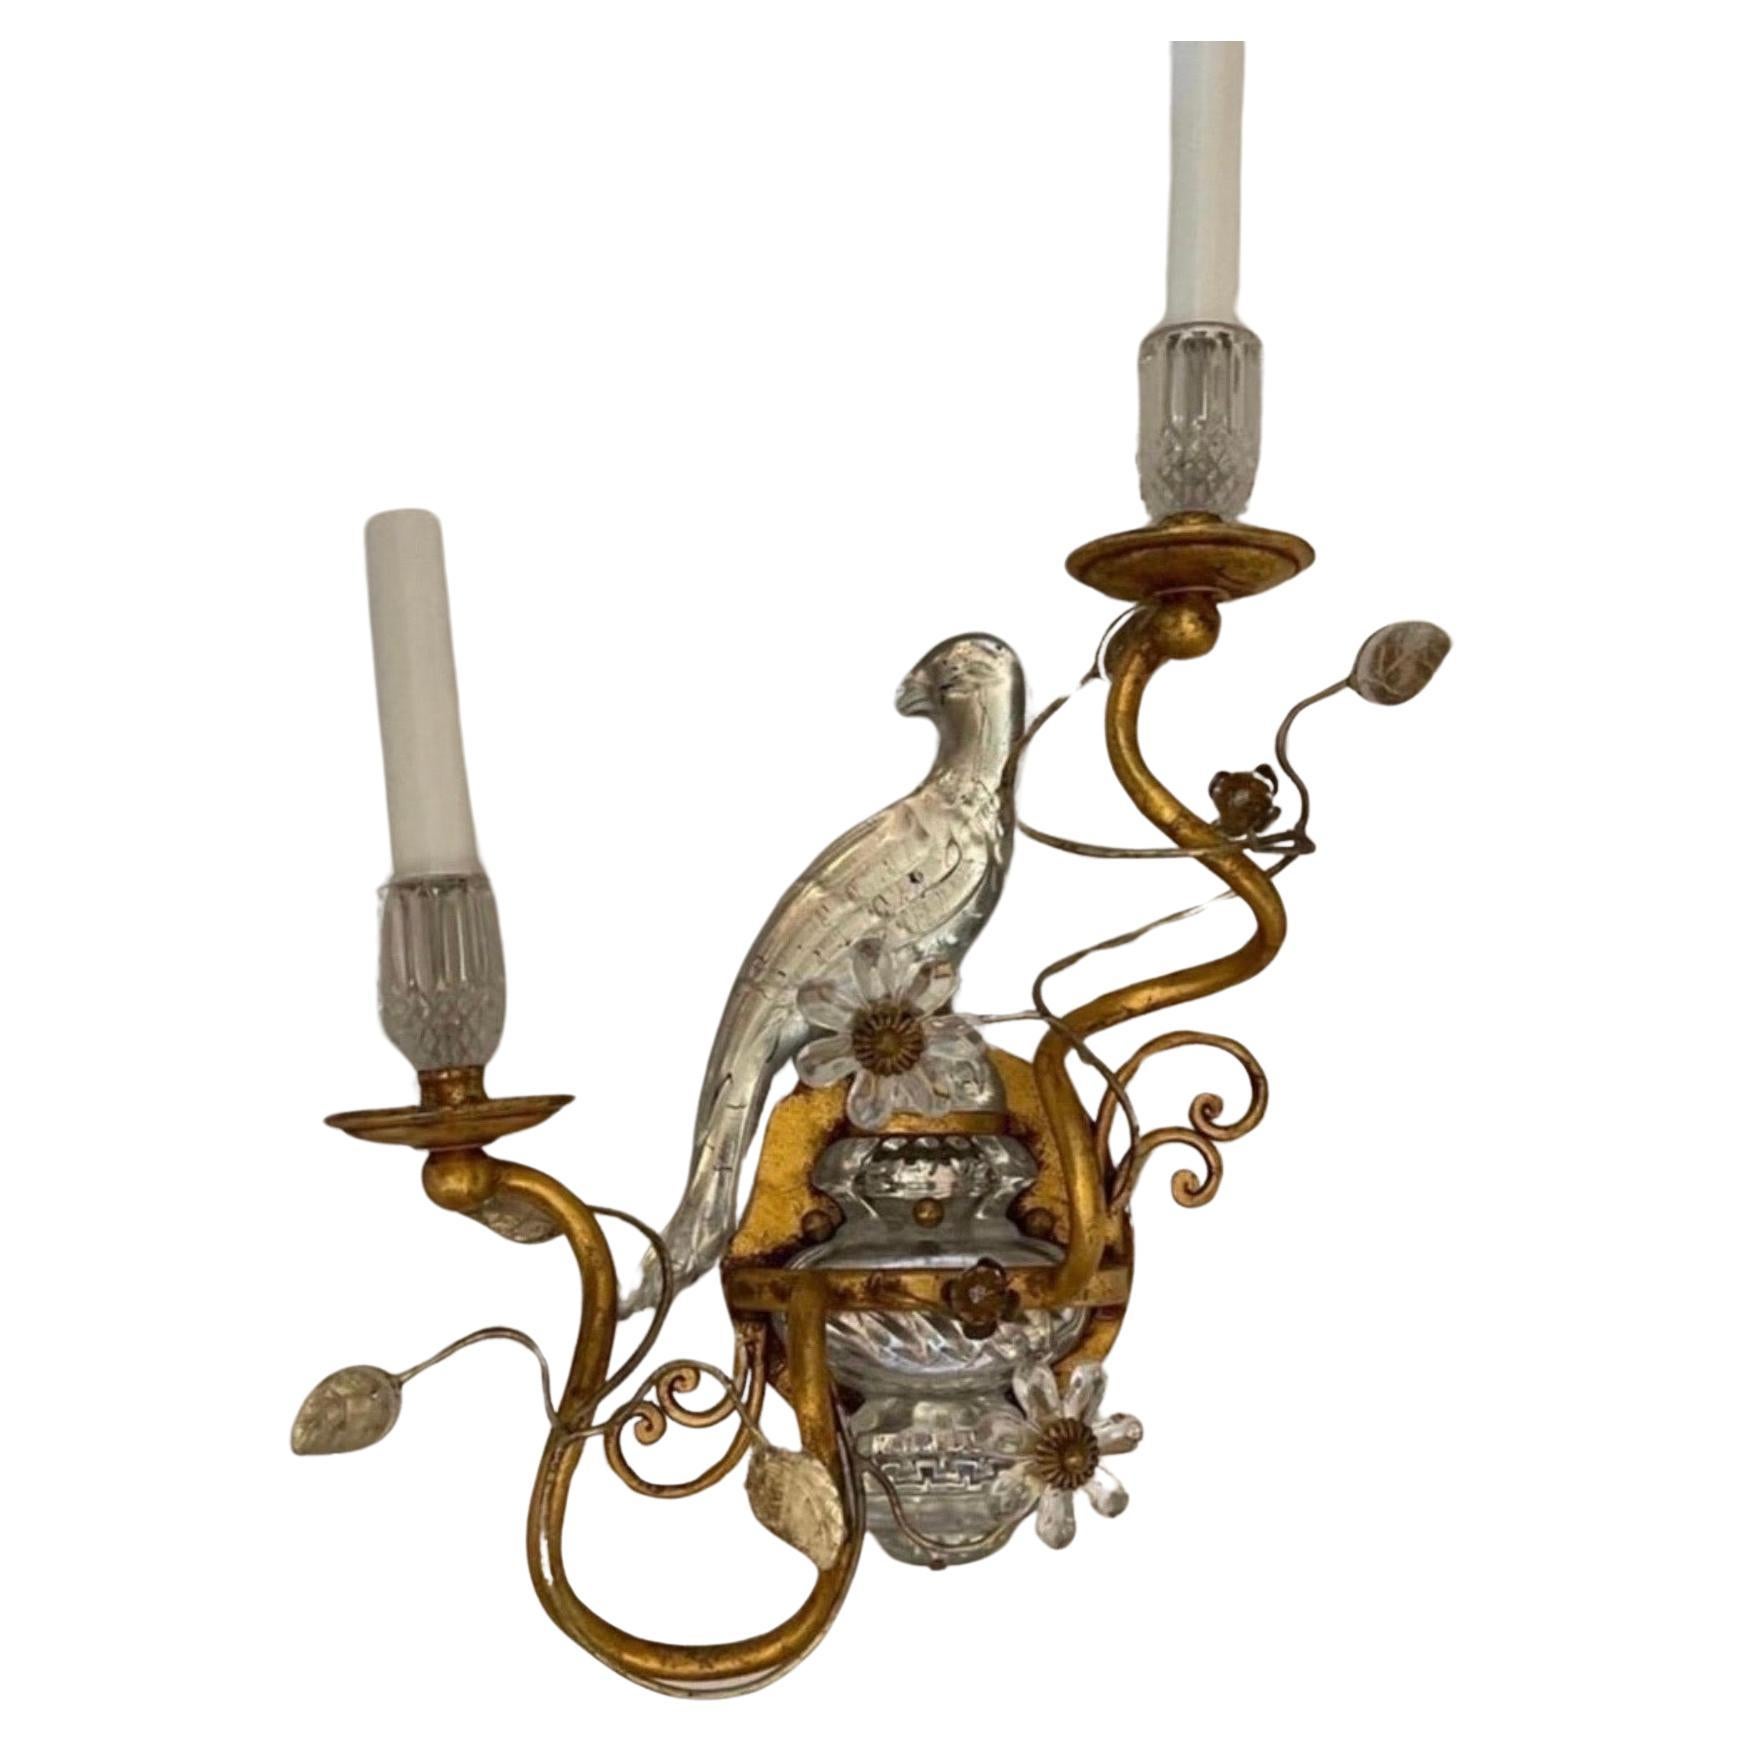 A wonderful pair of faux rock crystal / glass birds sitting on top of an urn form base, with a beautiful gold gilt patina these sconces come ready to install with all mounting hardware. They are in the manner of Maison Bagues & Sherle Wagner.